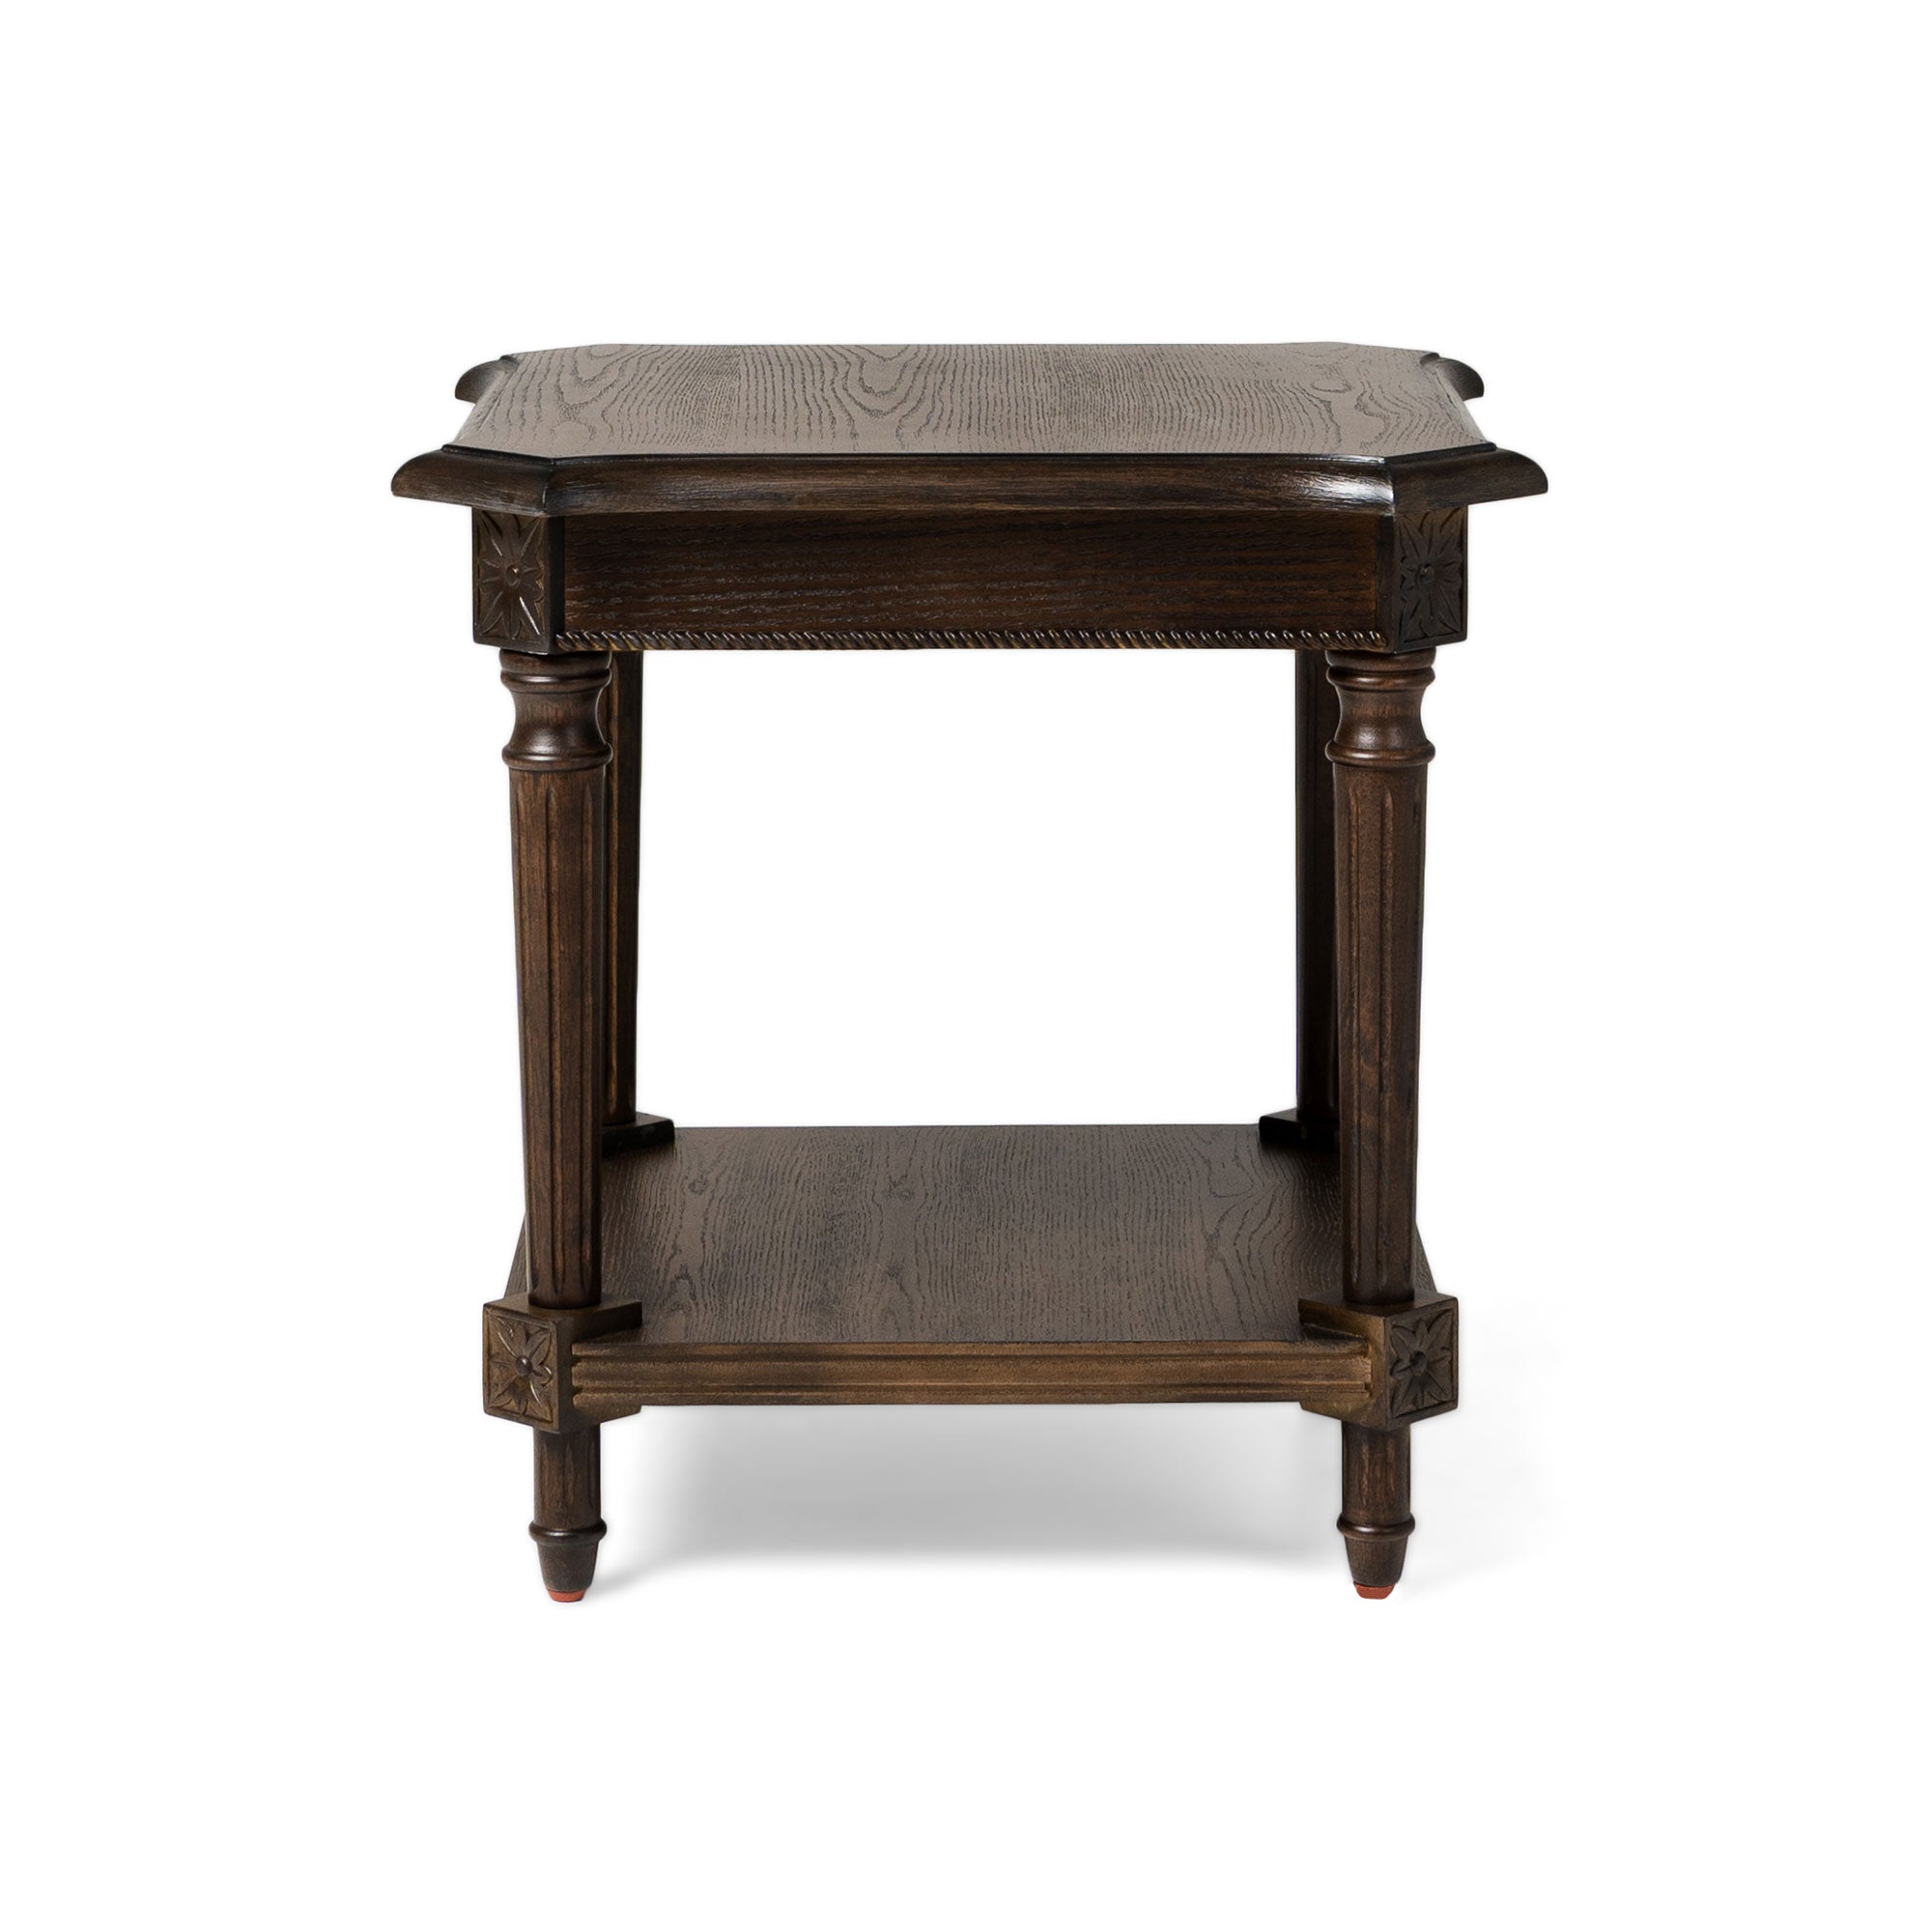 Pullman Traditional Square Wooden Side Table in Antiqued Brown Finish in Accent Tables by Maven Lane